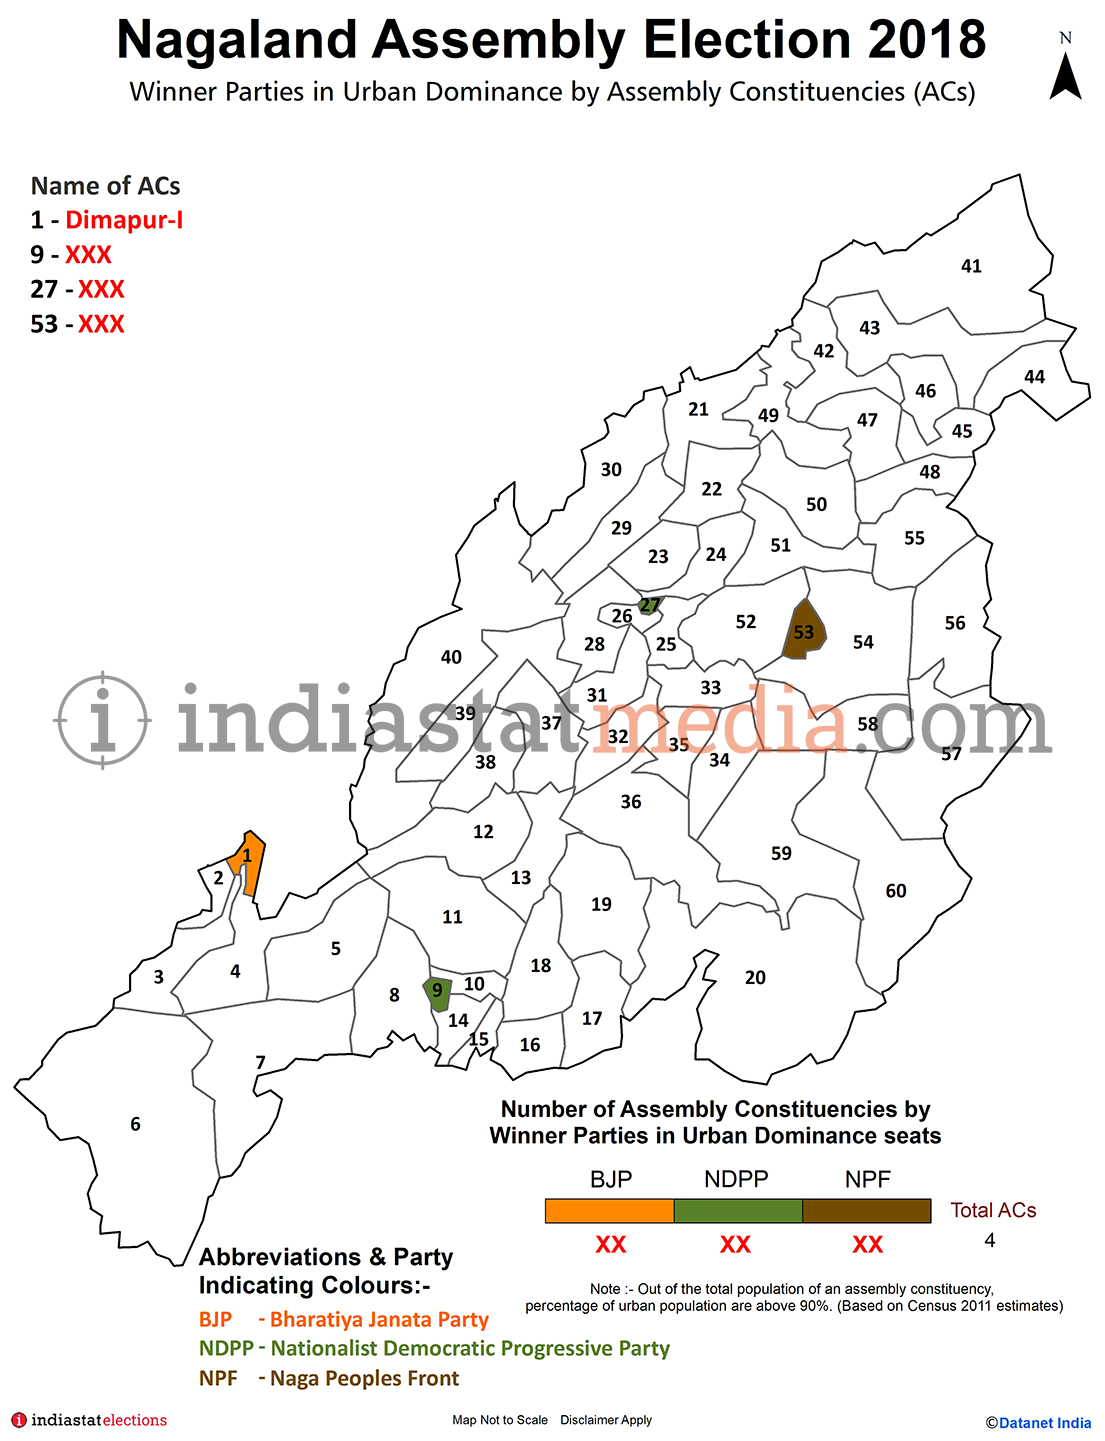 Winner Parties in Urban Dominance Constituencies in Nagaland (Assembly Election - 2018)